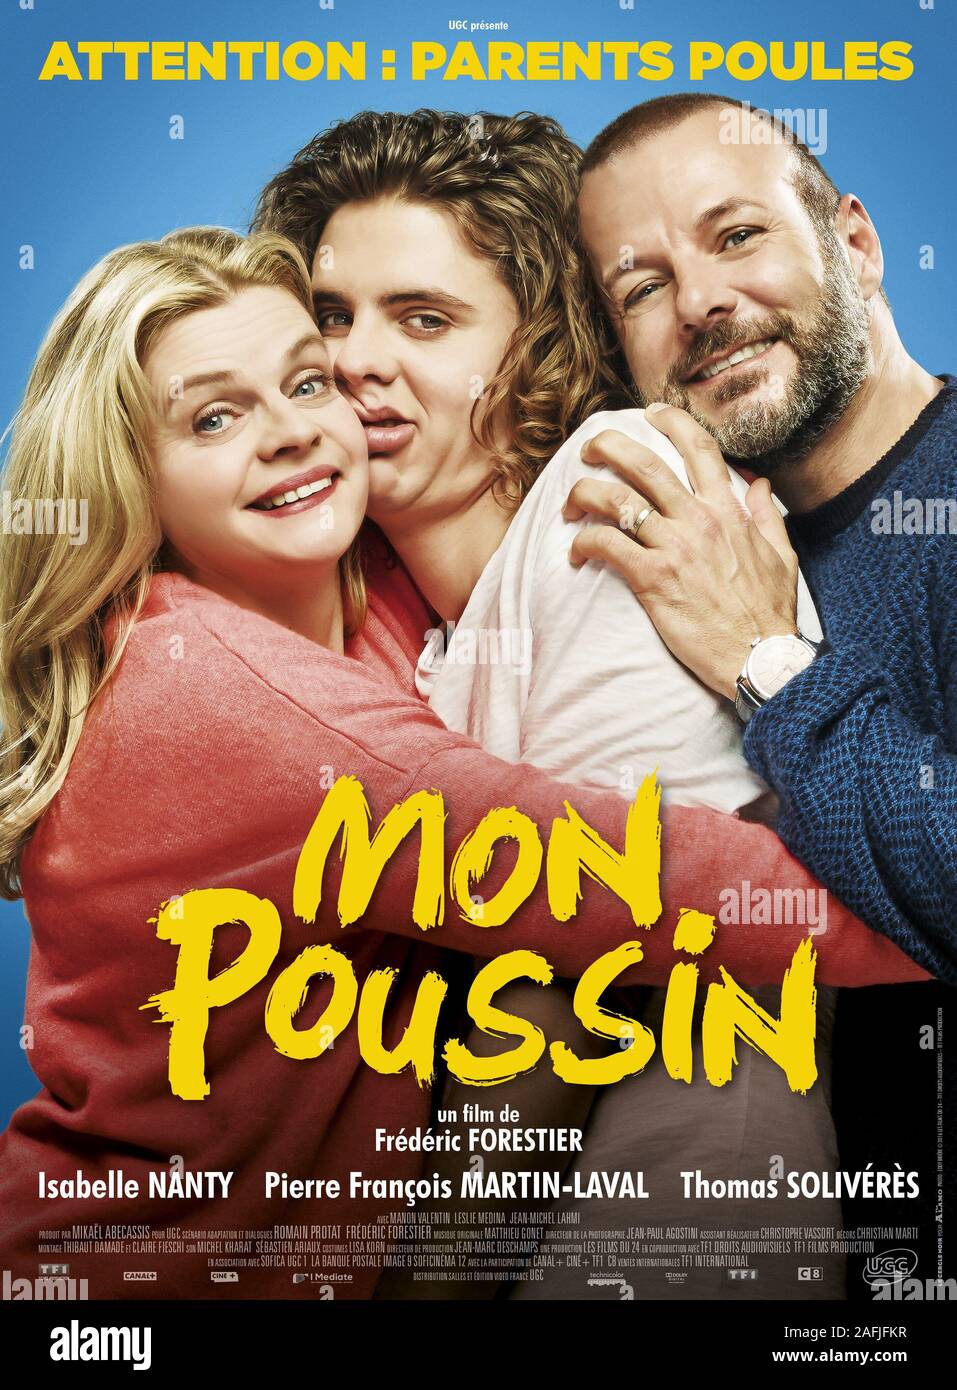 Mon Poussin Year : 2017 France Director : Frederic Forestier Pierre-François Martin Laval, Thomas Soliveres, Isabelle Nanty Poster (Fr) Stock Photo